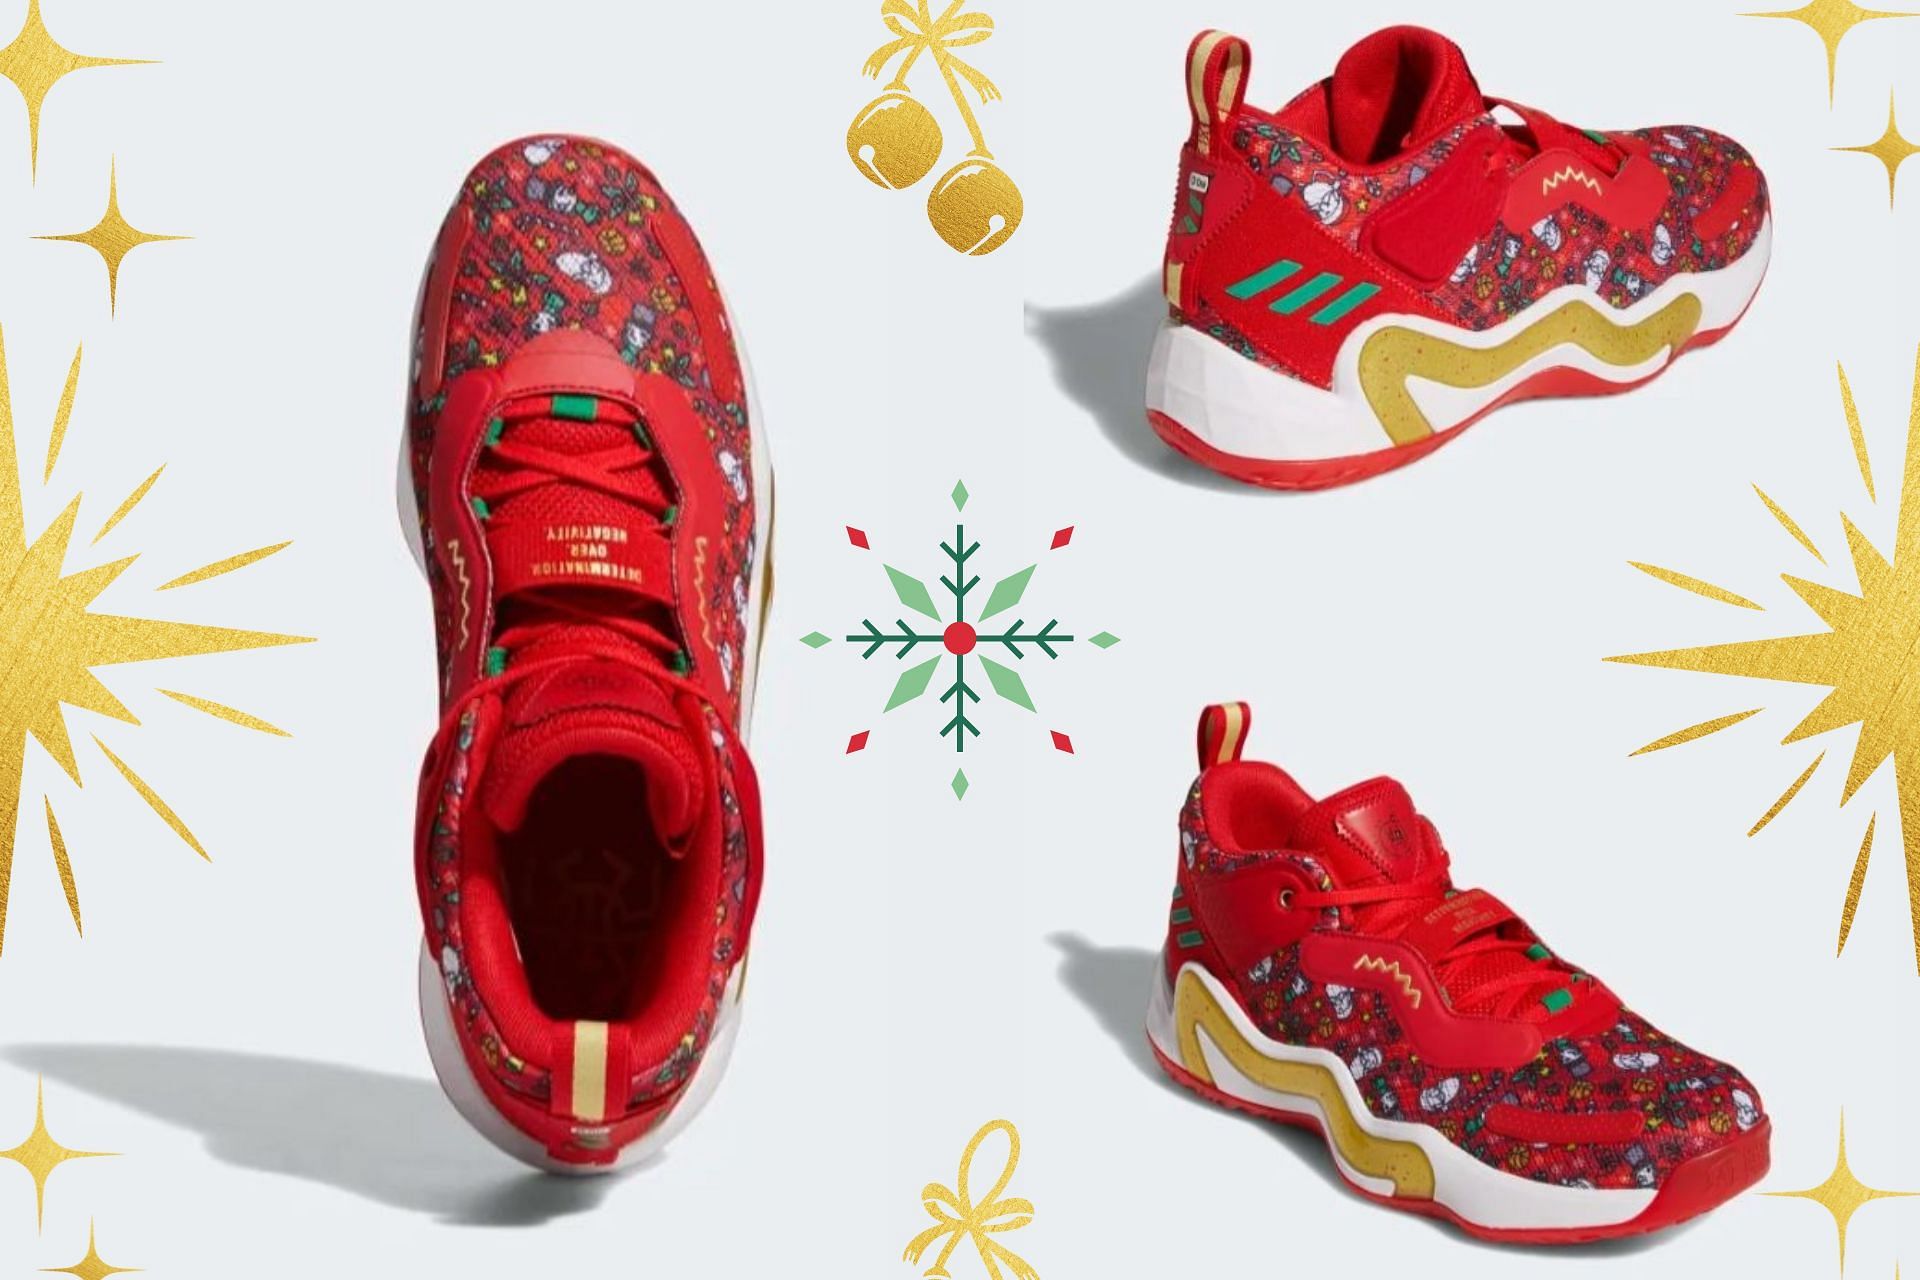 This year in Santa's sack: Adadas and IVIKE trainers